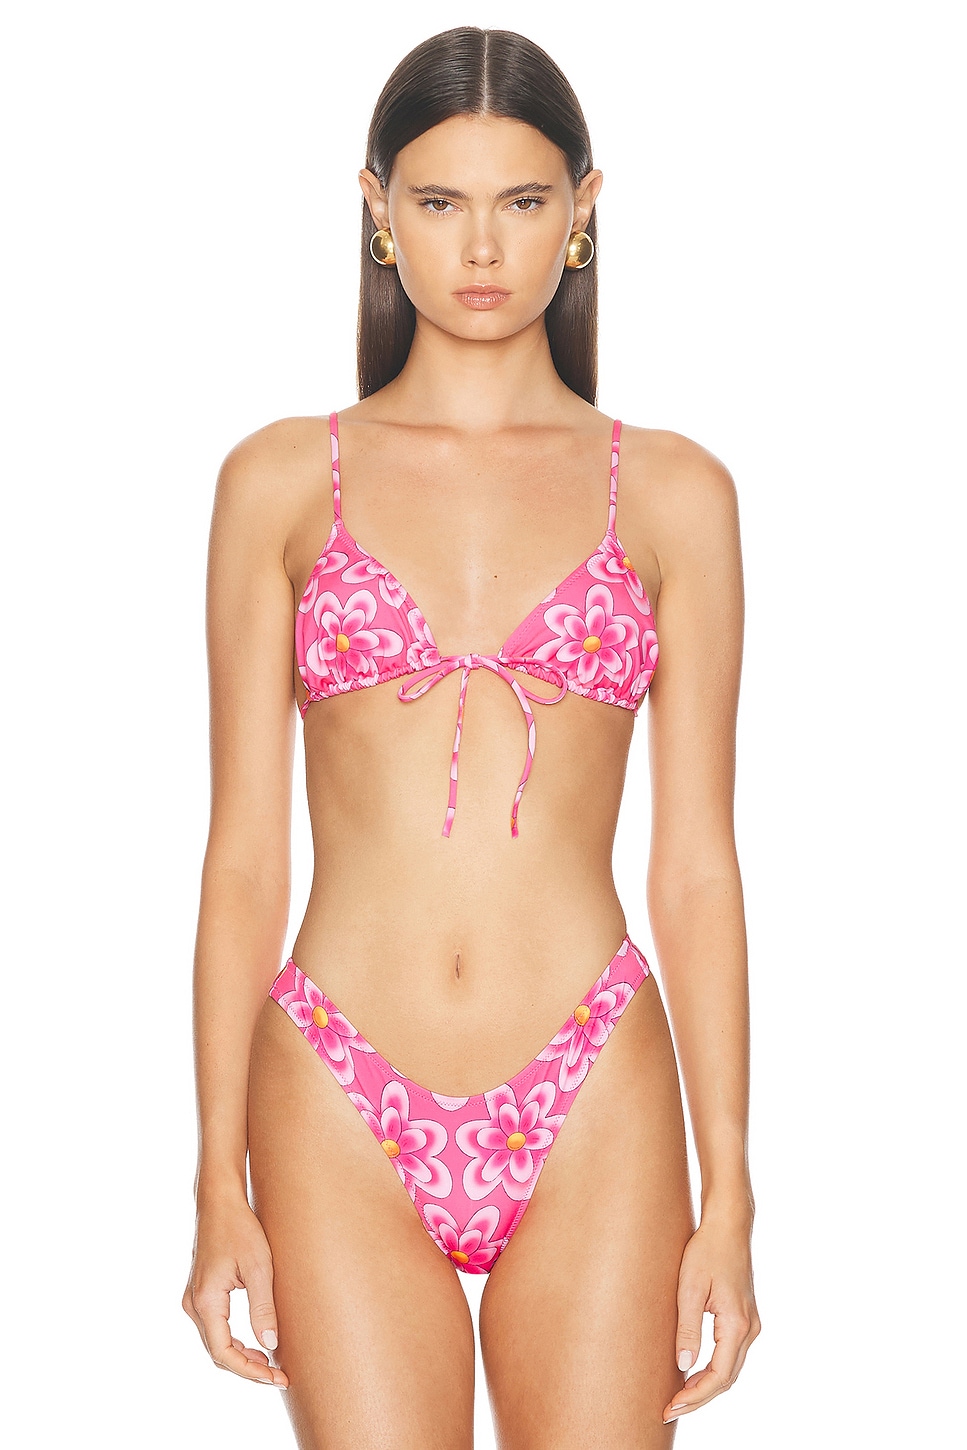 Heavy Manners X Elsa Hosk Triangle Front Tie Bikini Top In Not Your Barbie